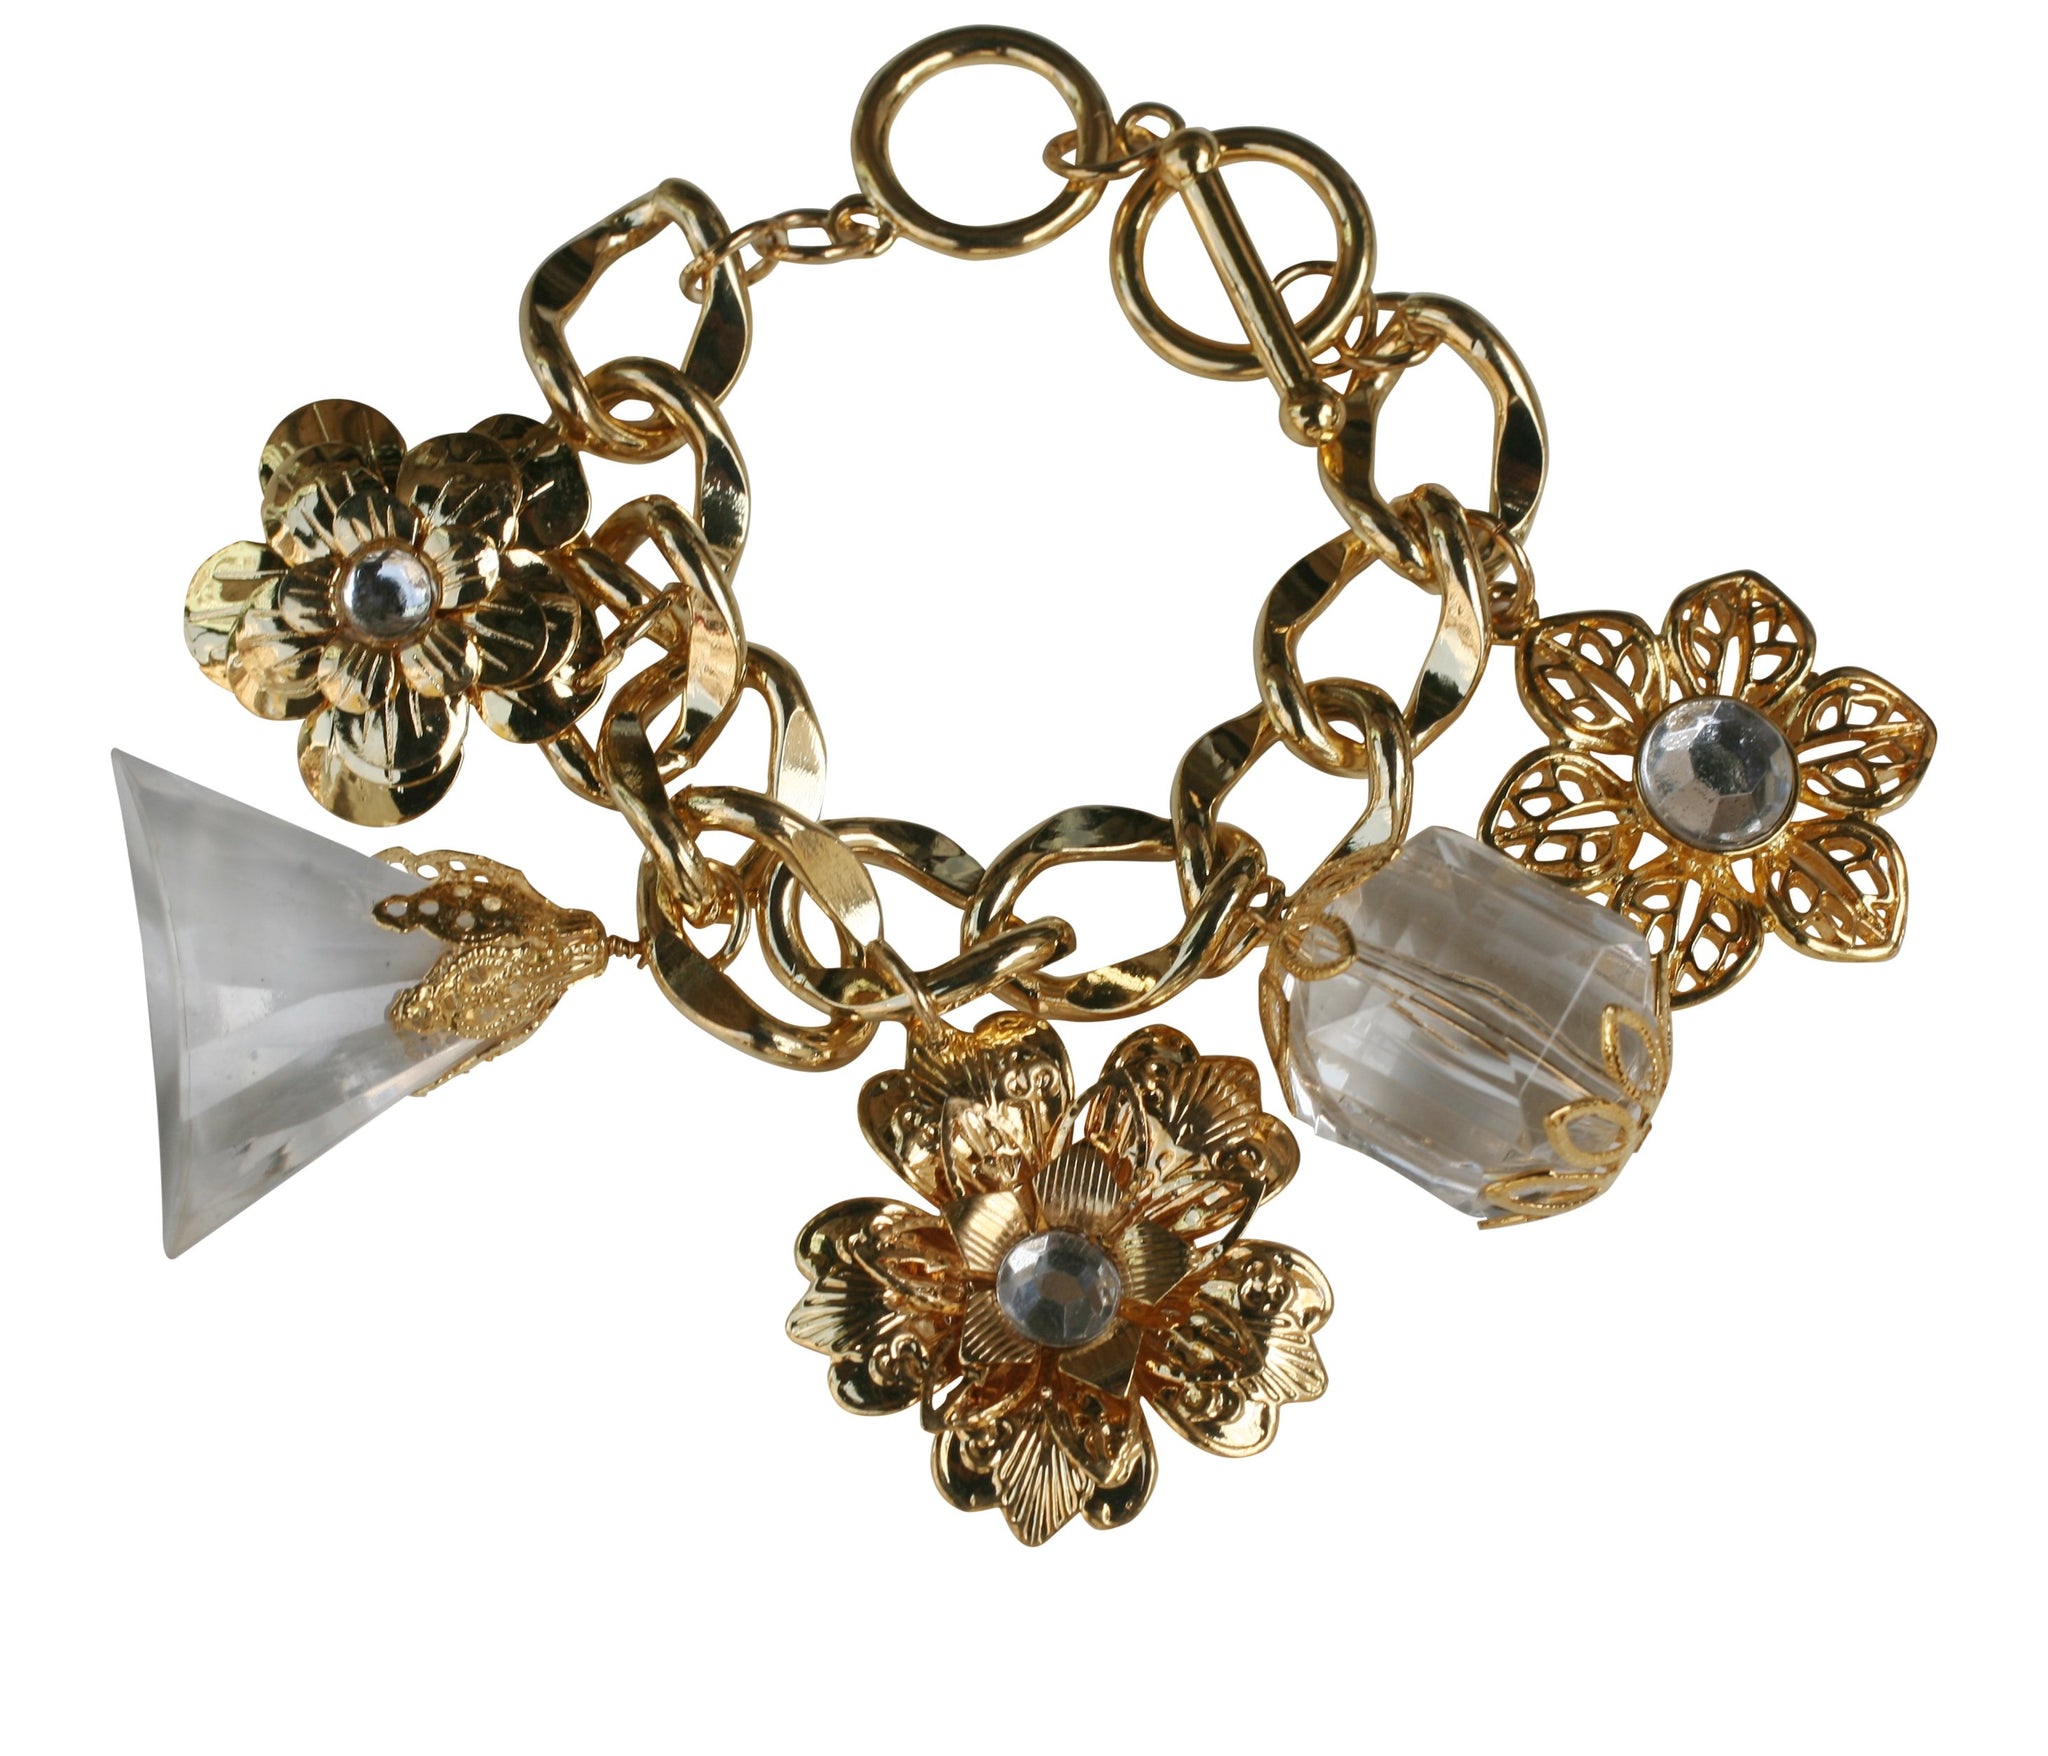 Chain link charm bracelet with dangling faceted stone charms and flowers